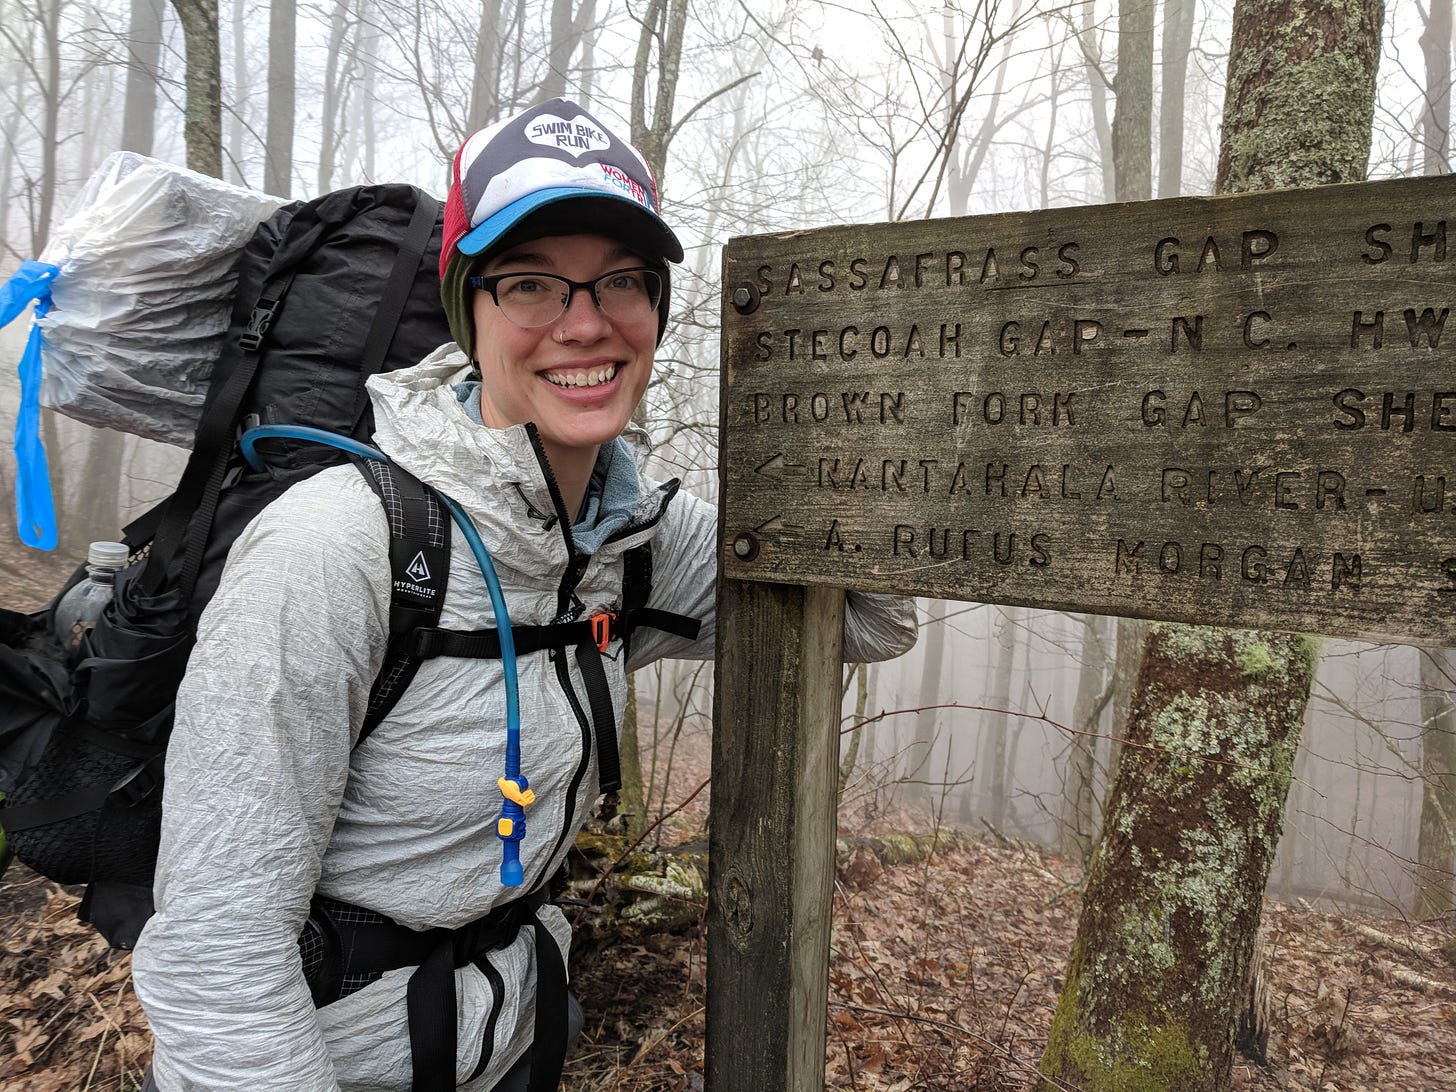 Another photograph of Kate from the Appalachian Trail. Here, she stands with one arm leaning against a sign for Sassafrass Gap in North Carolina. It's a foggy, wet day. The sleeping pad on her pack is covered in a trash bag, she wears a rain coat, but she still has a giant smile on her face.